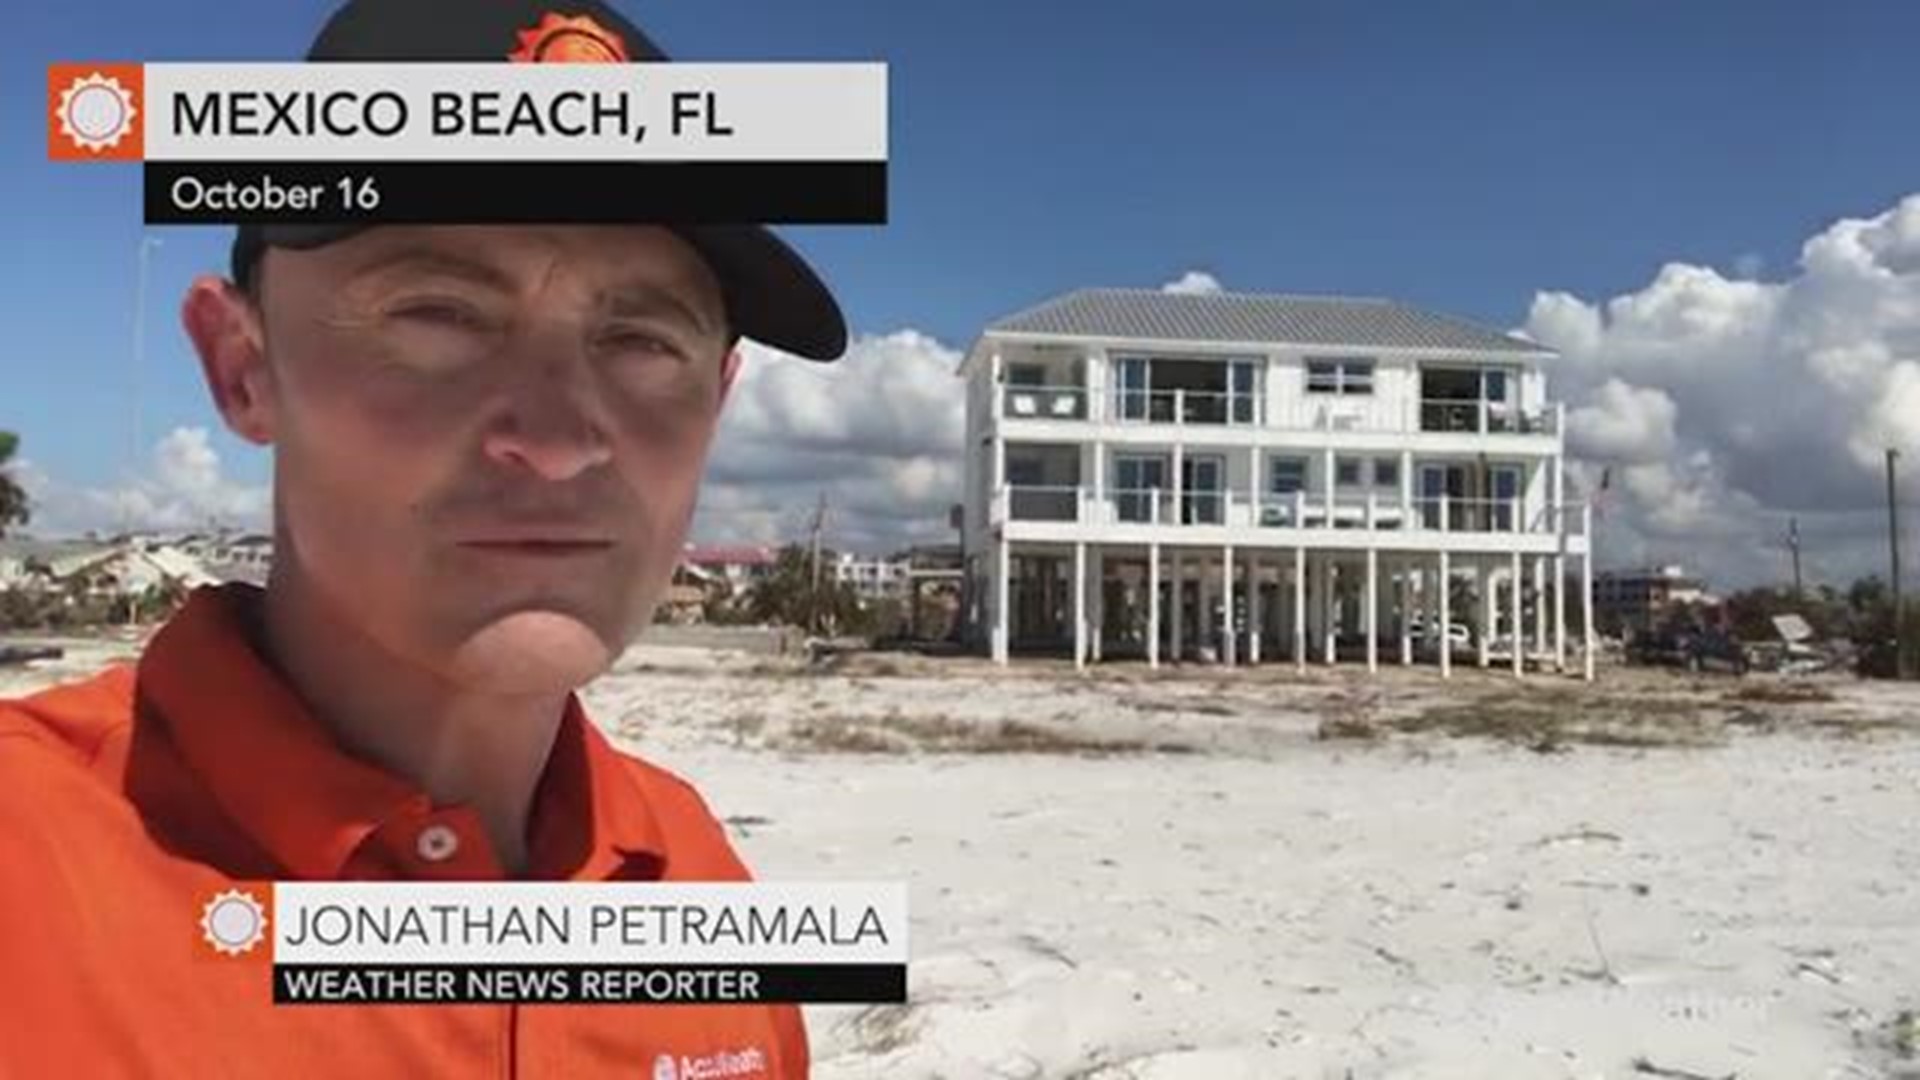 AccuWeather's Jonathan Petramala reports in front of one of the few structures still standing on Mexico Beach, Florida that somehow took very little damage.